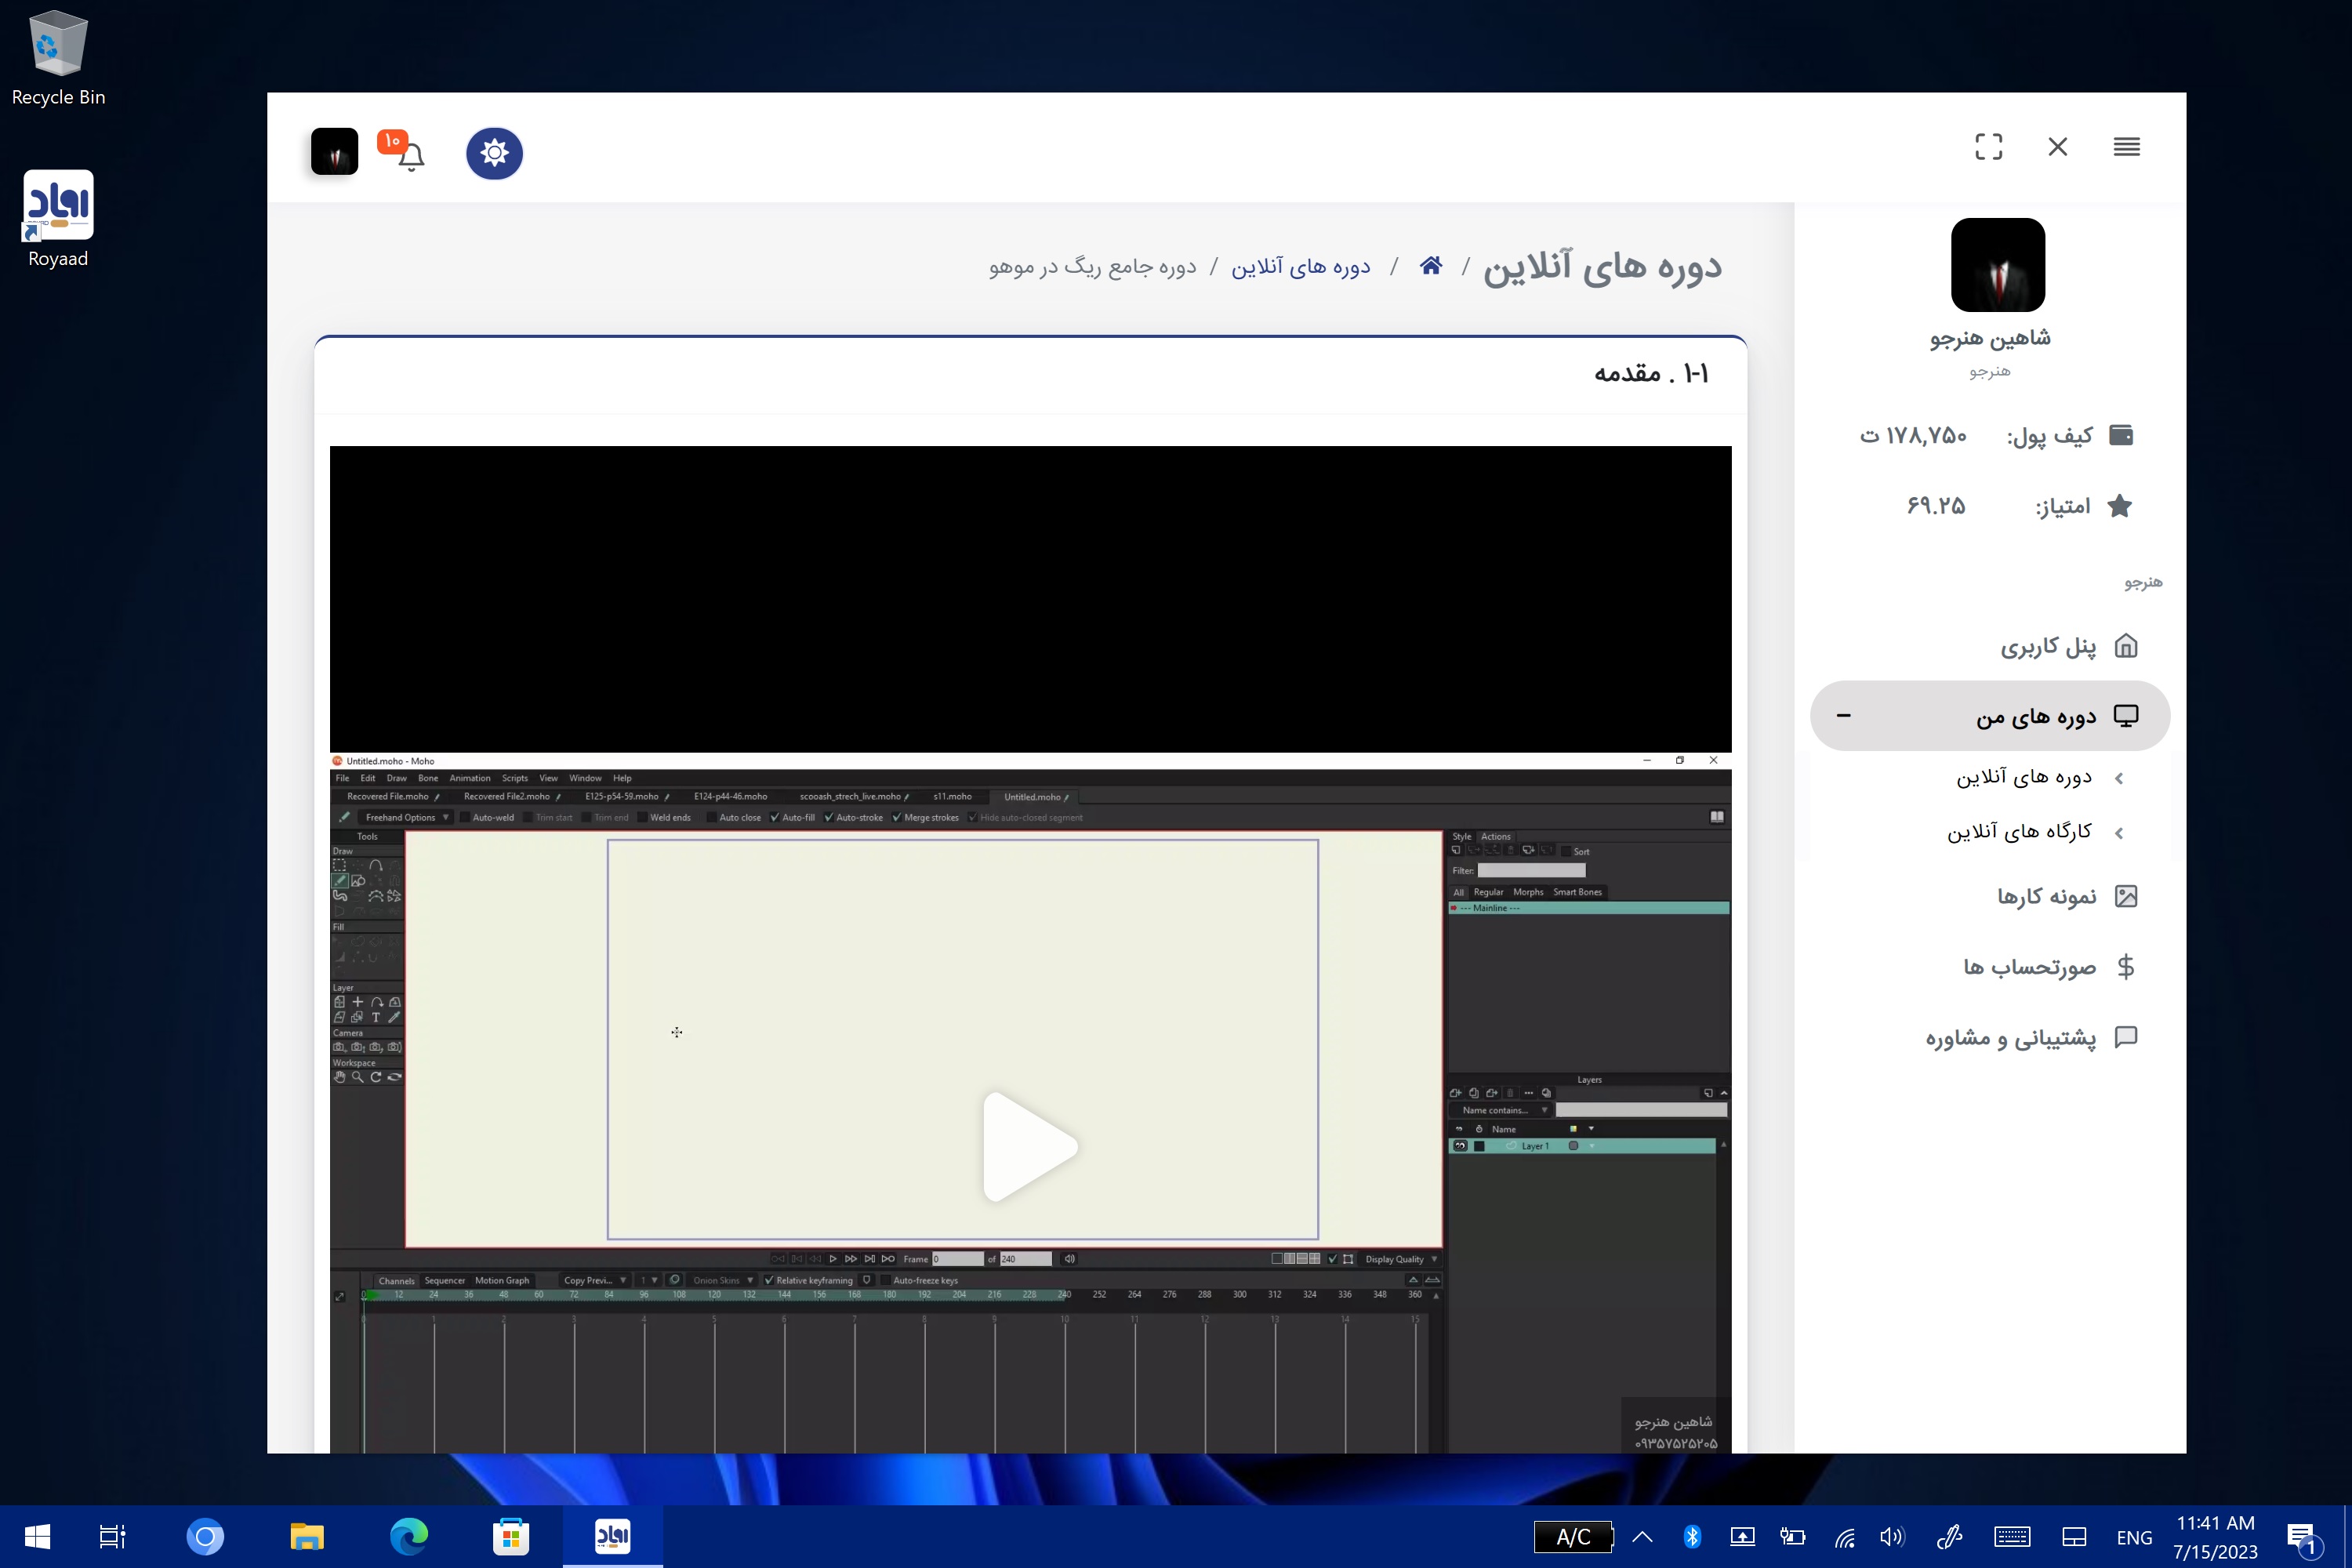 Shahinsoft.ir Royaad desktop application Encrypted video player for lessons